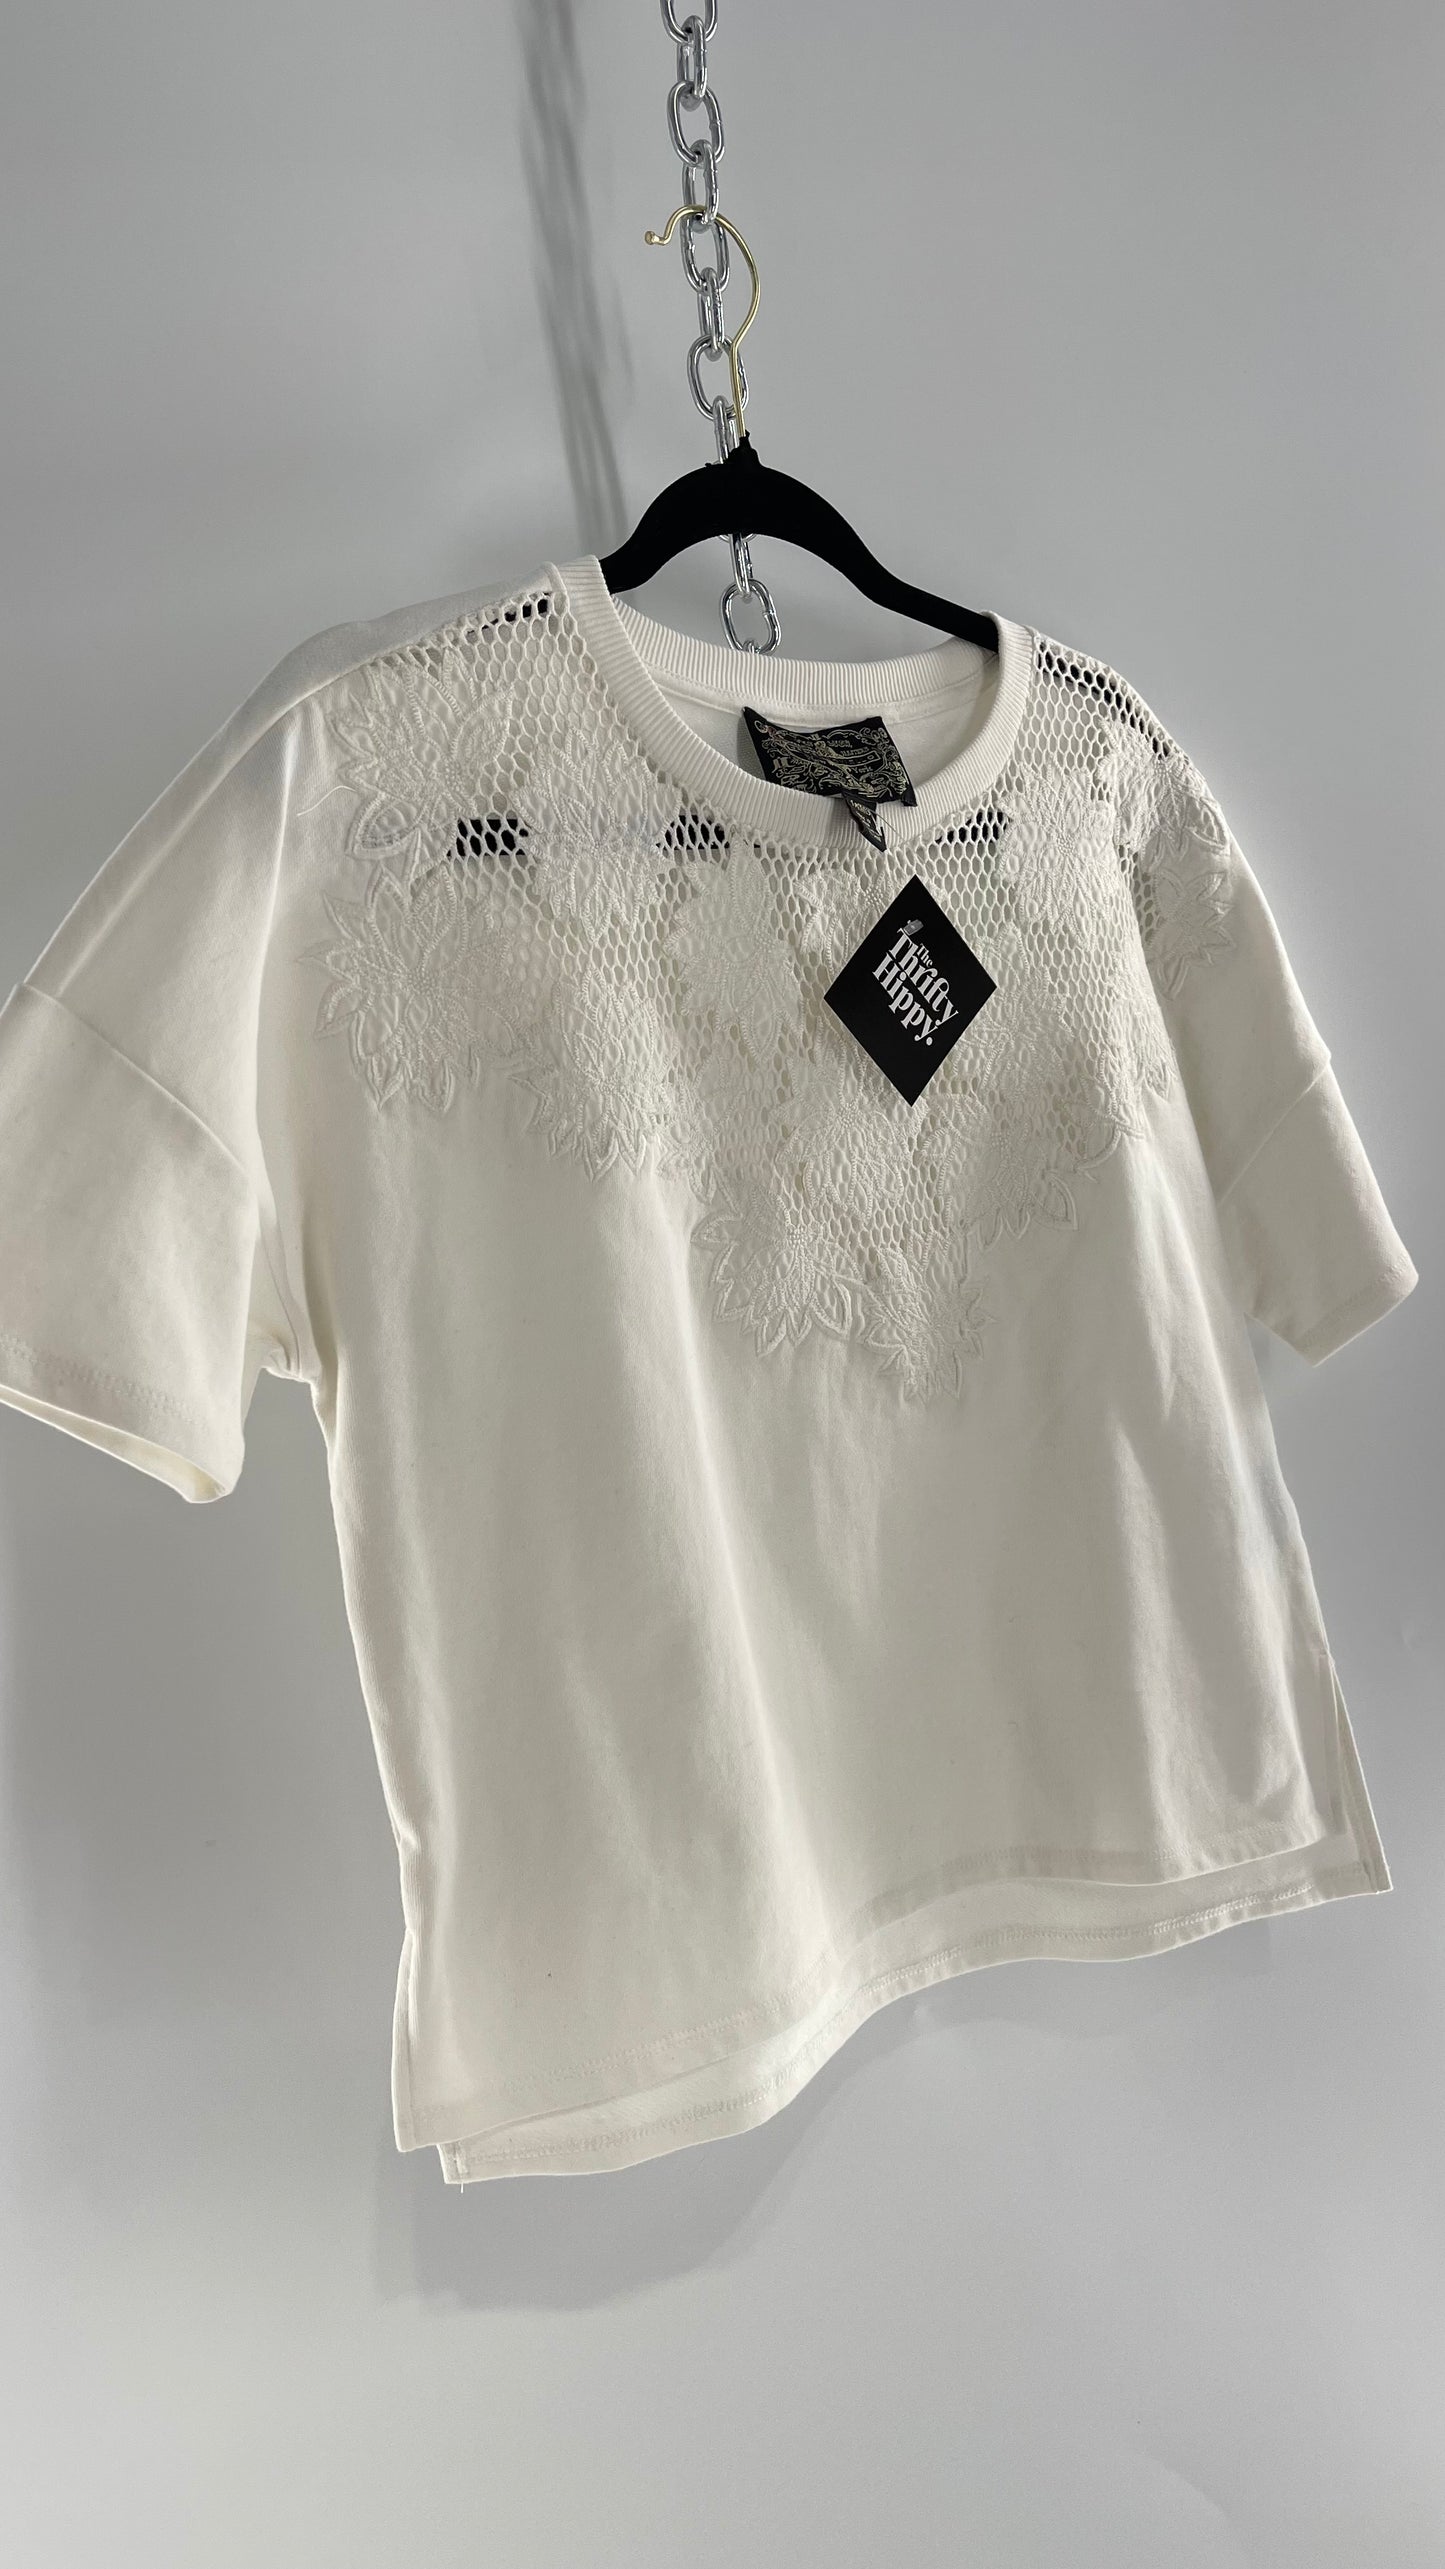 JAMES COVIELLO NY, NY White Thick T Shirt with Embroidered Florals and Mesh (S Petite)